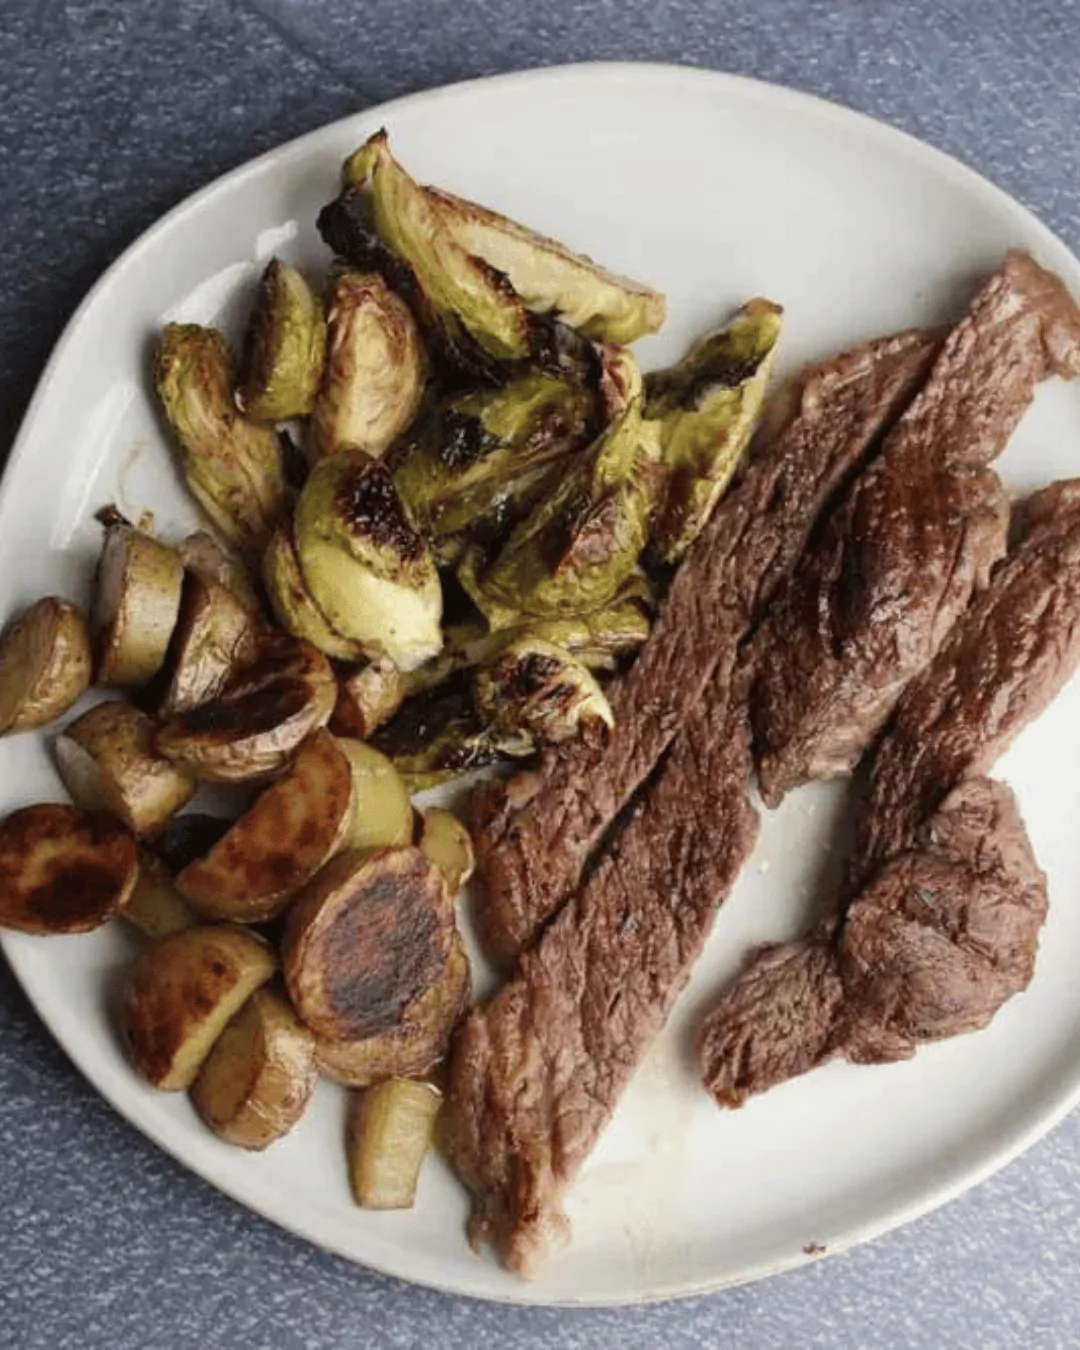 Pan-Seared Sirloin Steak with Sprouts and Potatoes